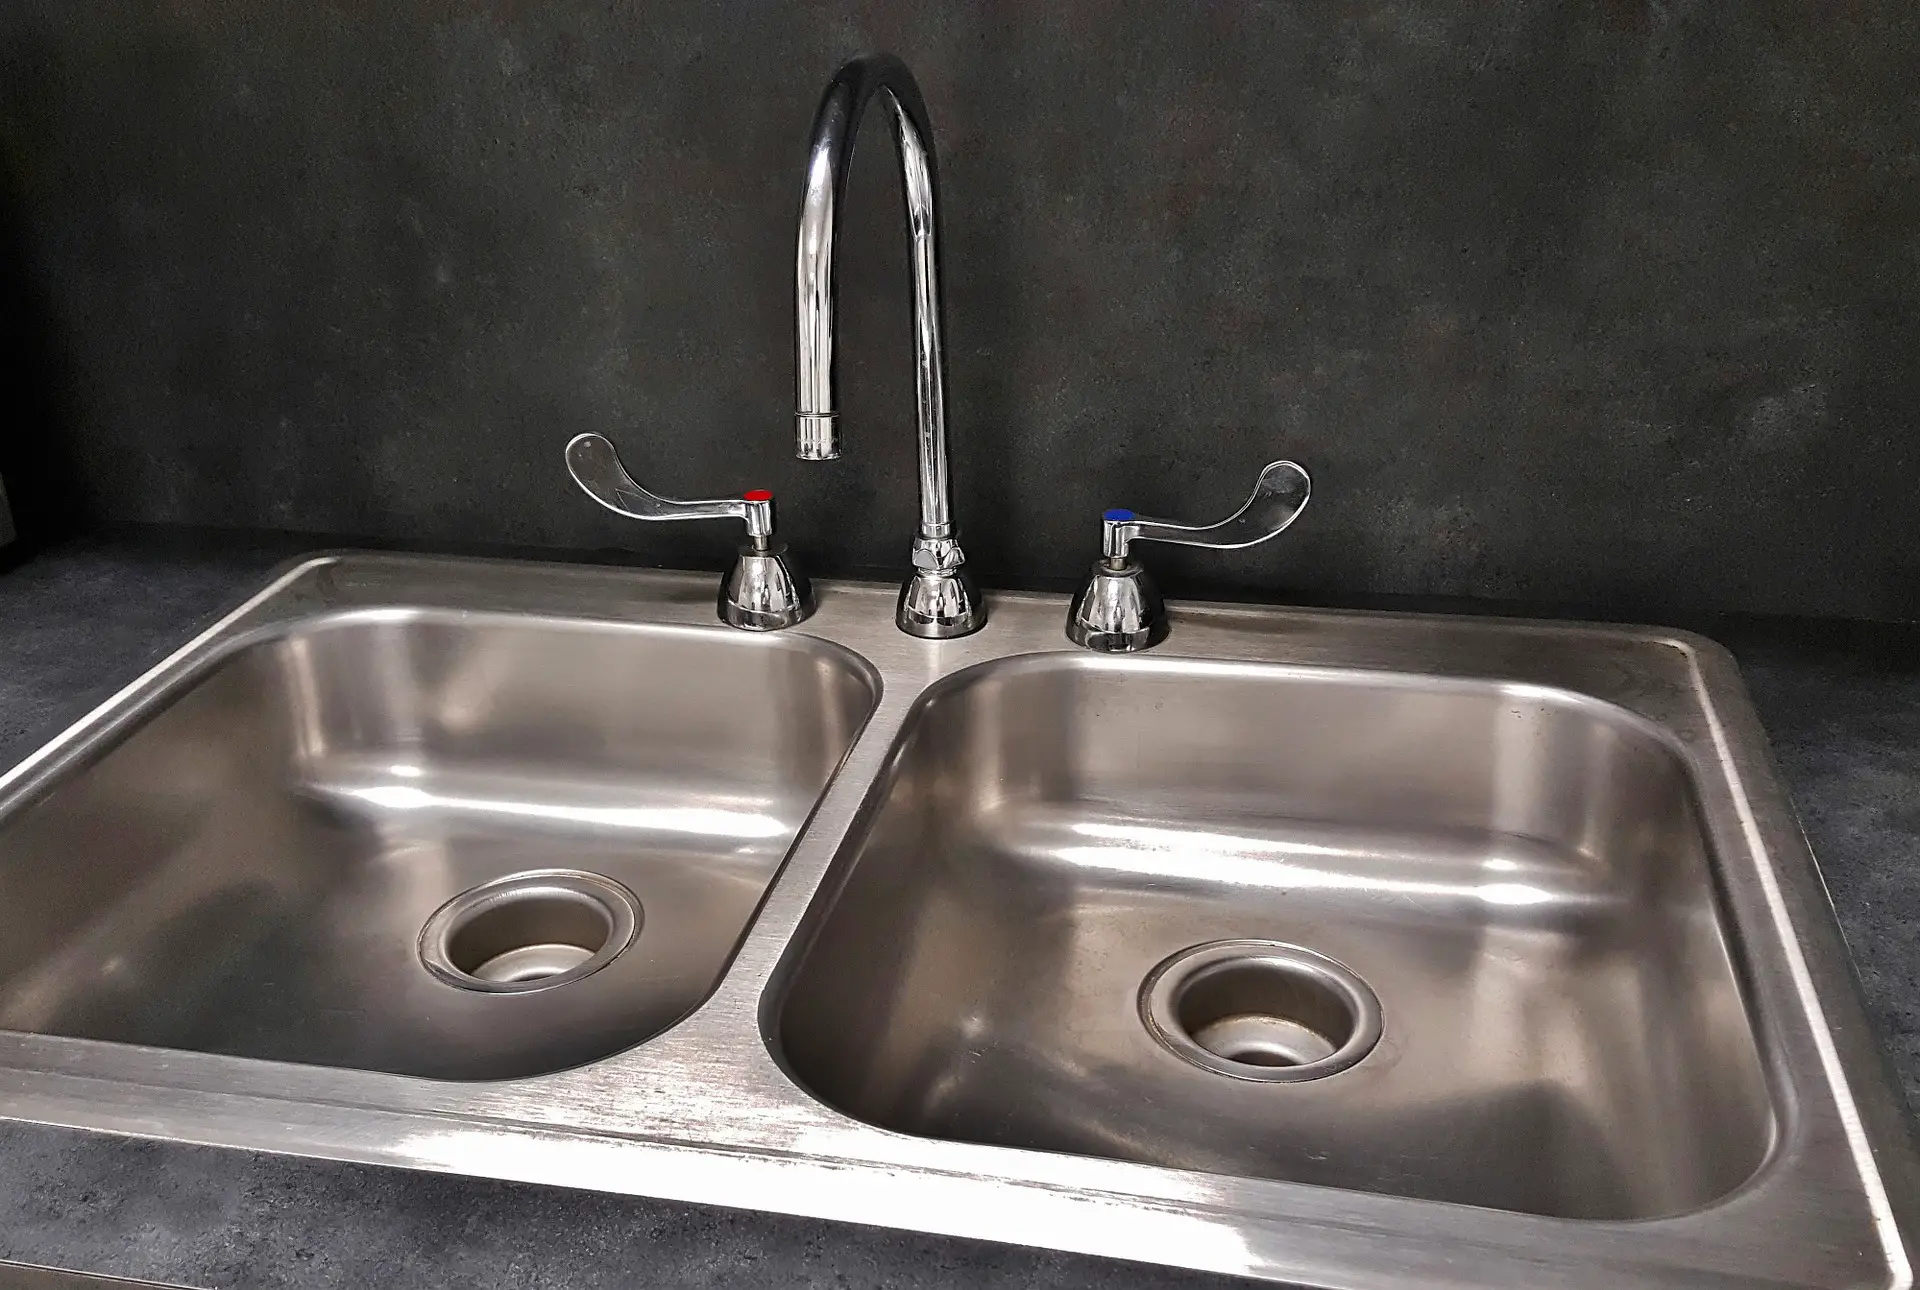 How To Install Utility Sink In Laundry Room